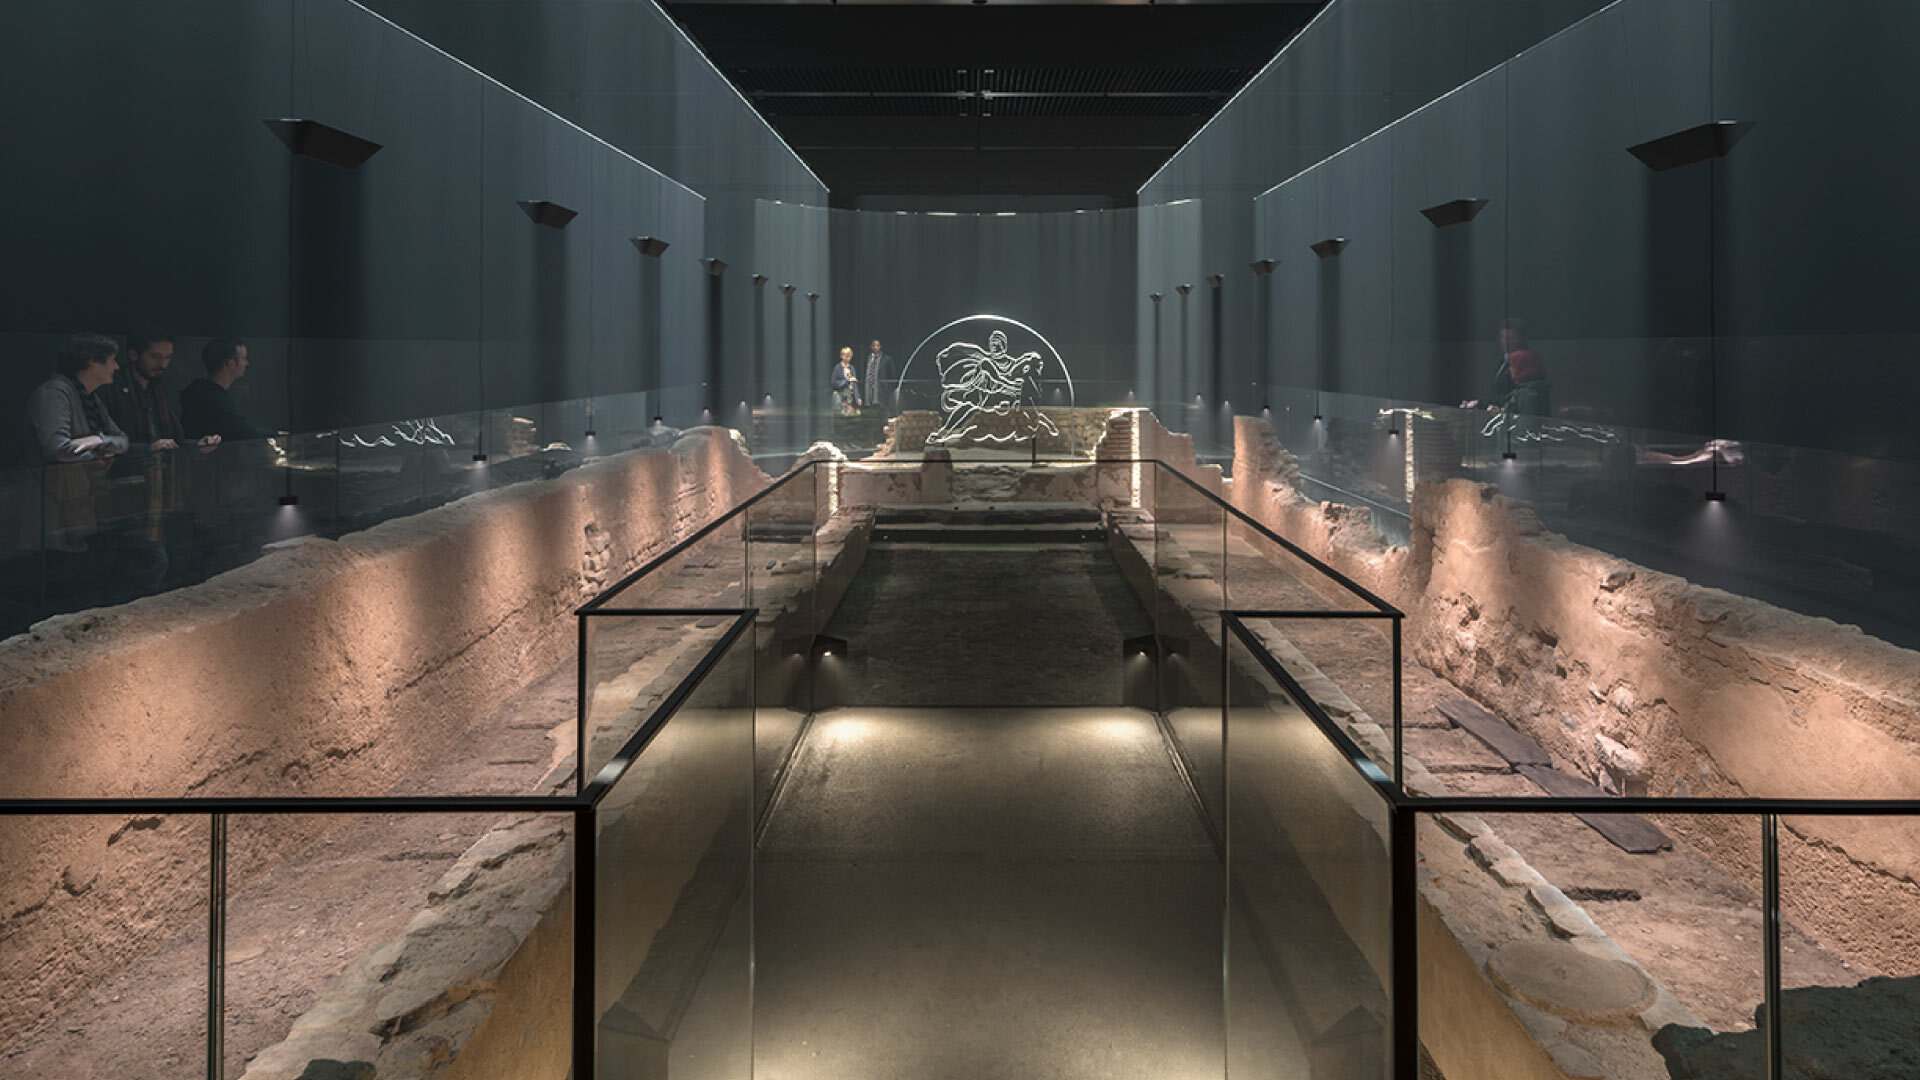 Evening in the City - Temple Mithras – interior of exhibition space, low stone foundation ruins lit with down lamps in a long room of grey walls